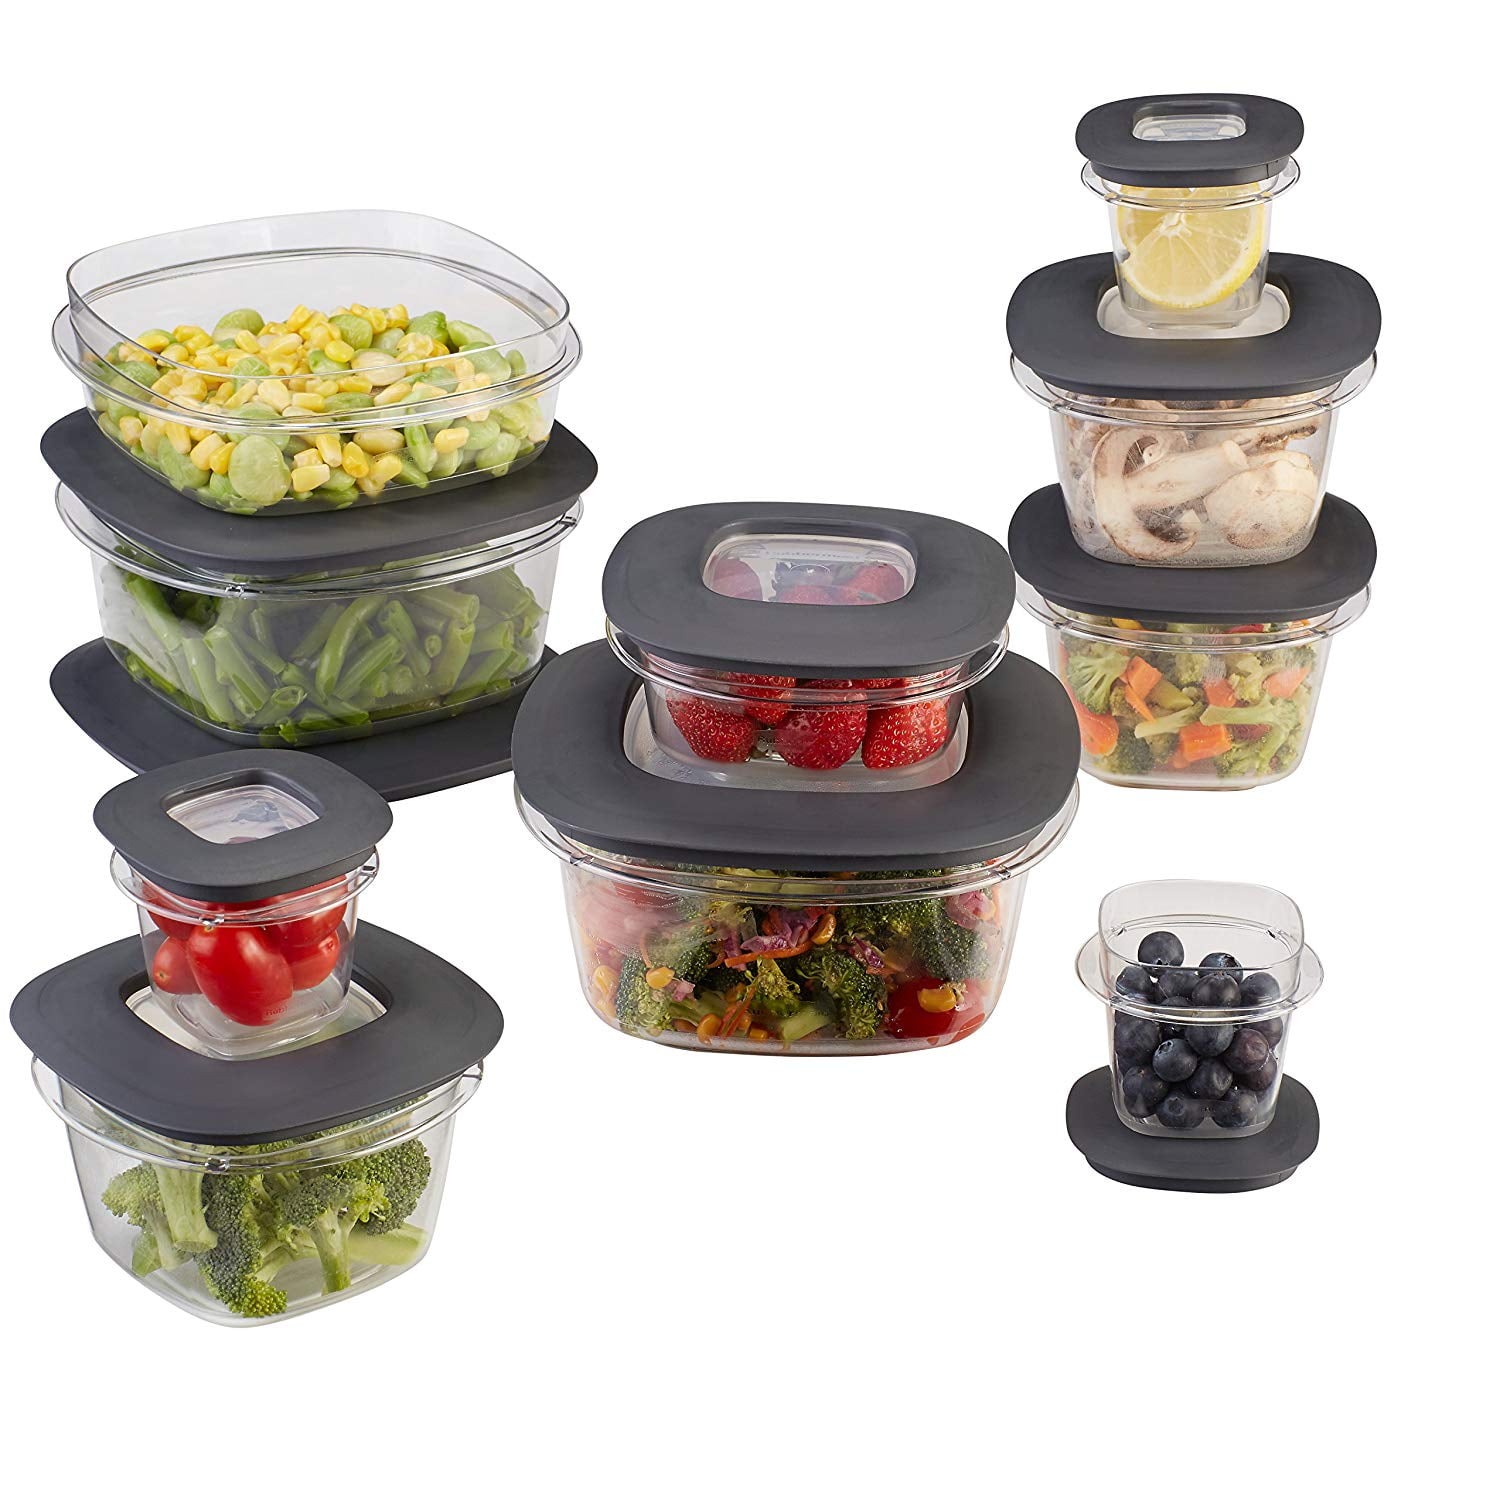 Rubbermaid Premier Food Storage Containers with Easy Find Lids 20-Piece Set 